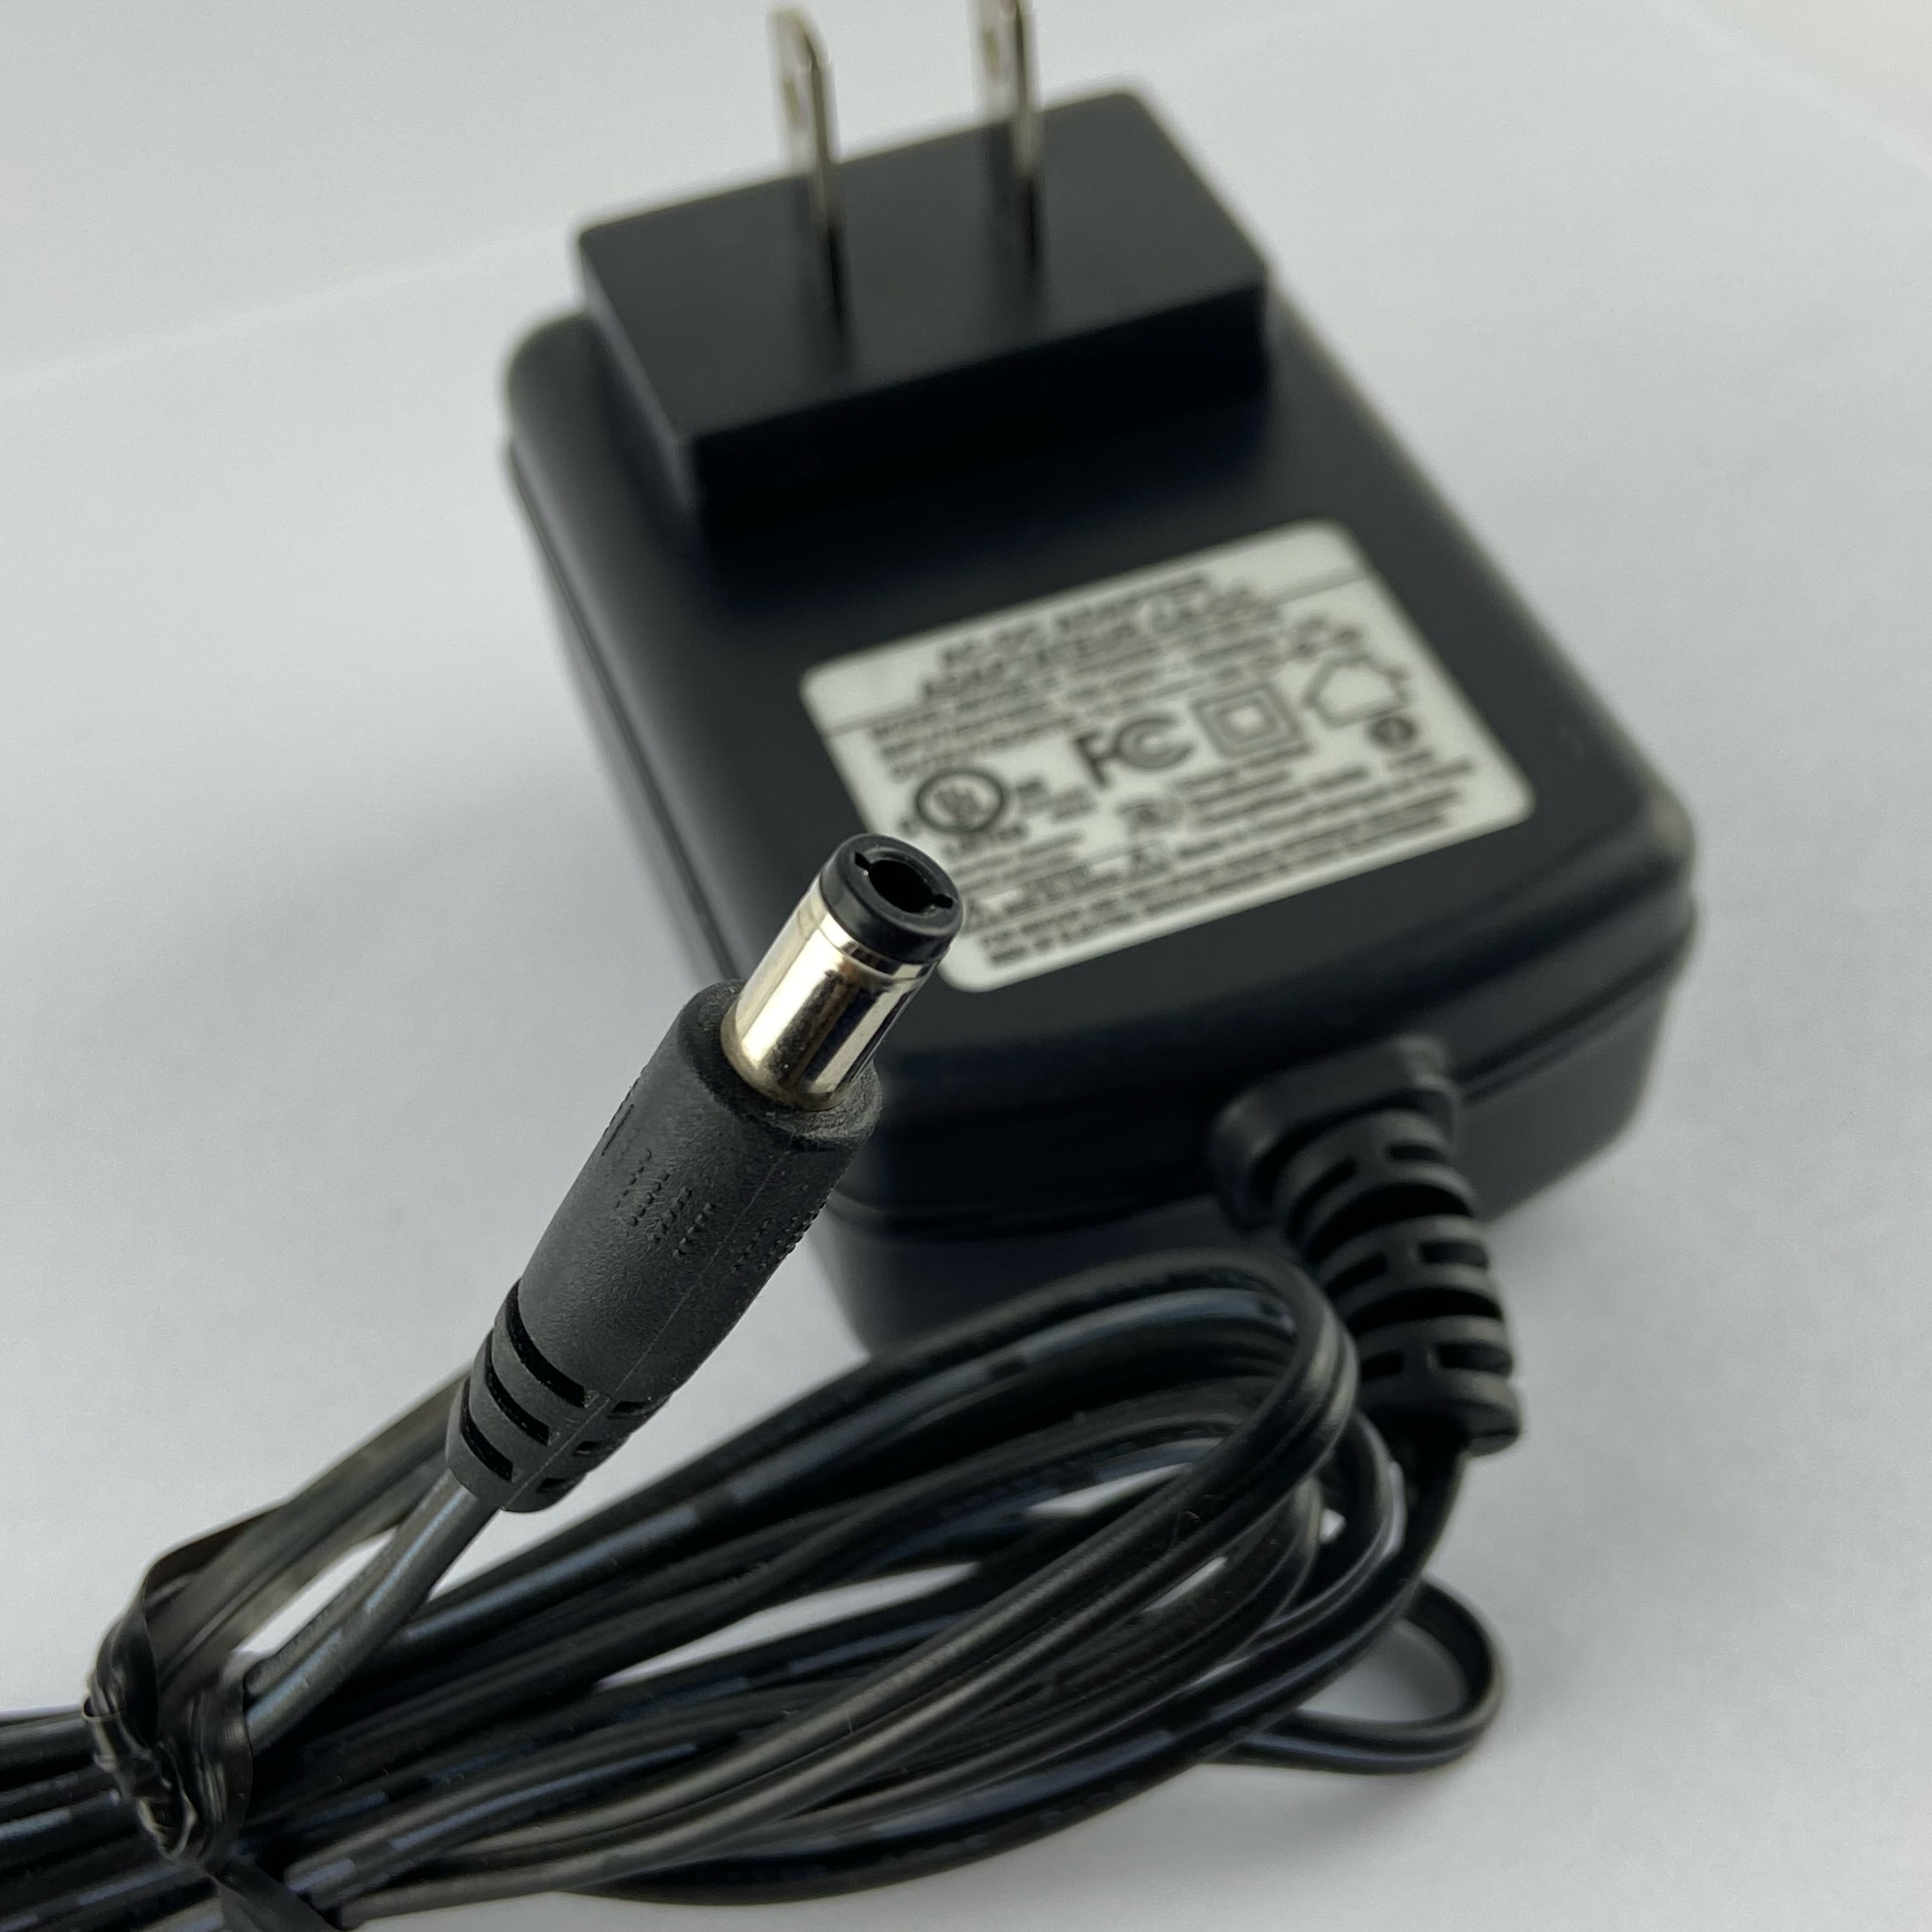 Original AC-DC ADAPTER FR30WB-135180-US Power Adapter Cable Cord Box Adap Brand: AC-DC ADAPTER T